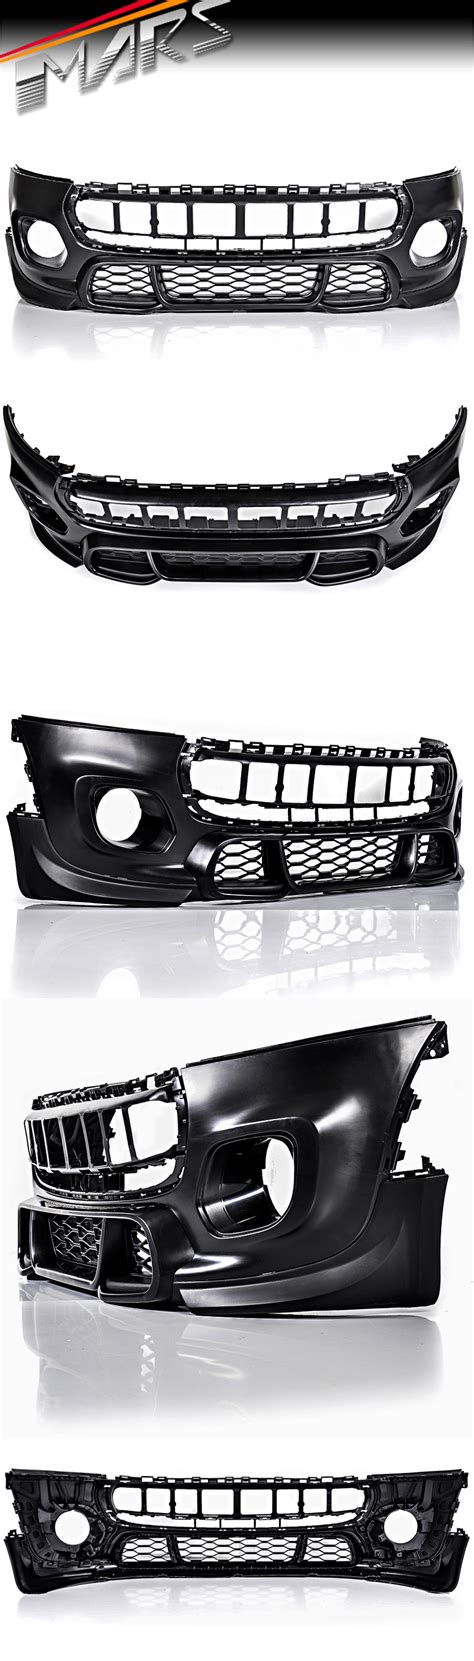 Jcw Style Front Bumper Bar With Grille For Mini Cooper F56 F55 Hatch